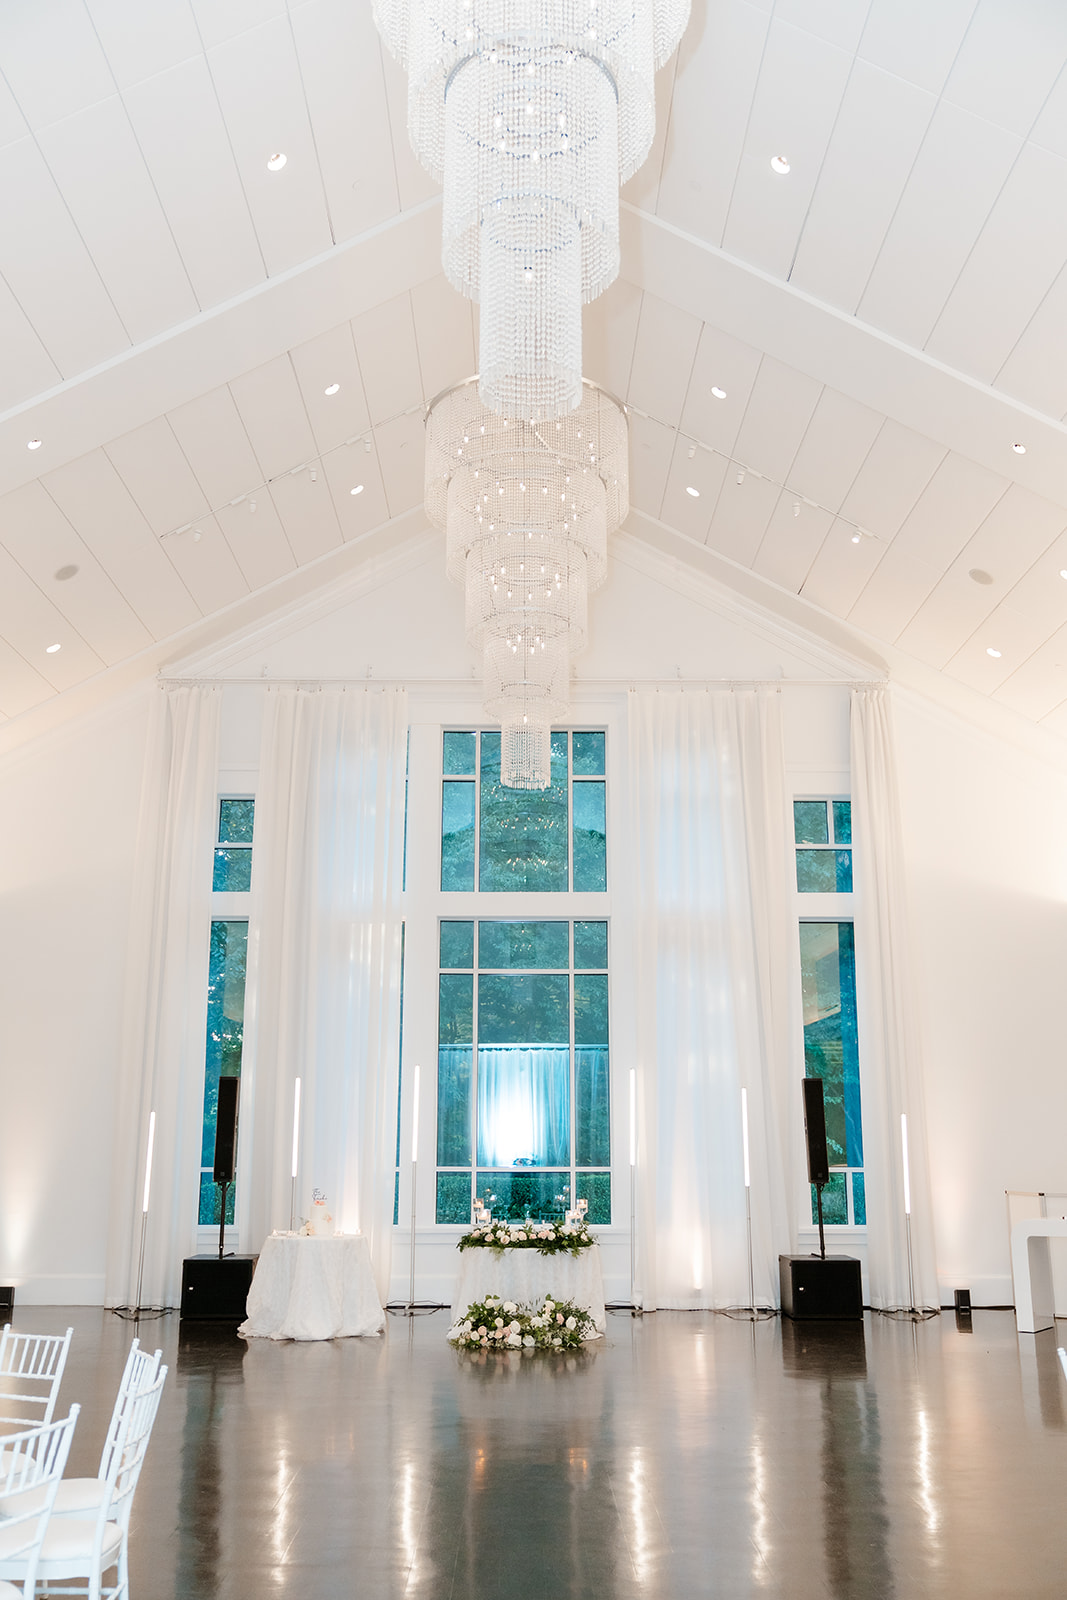 Elegant wedding venue Lakeview Pavilion with a long modern chandelier, high ceilings, white chairs, and floral decorations in front of tall windows.